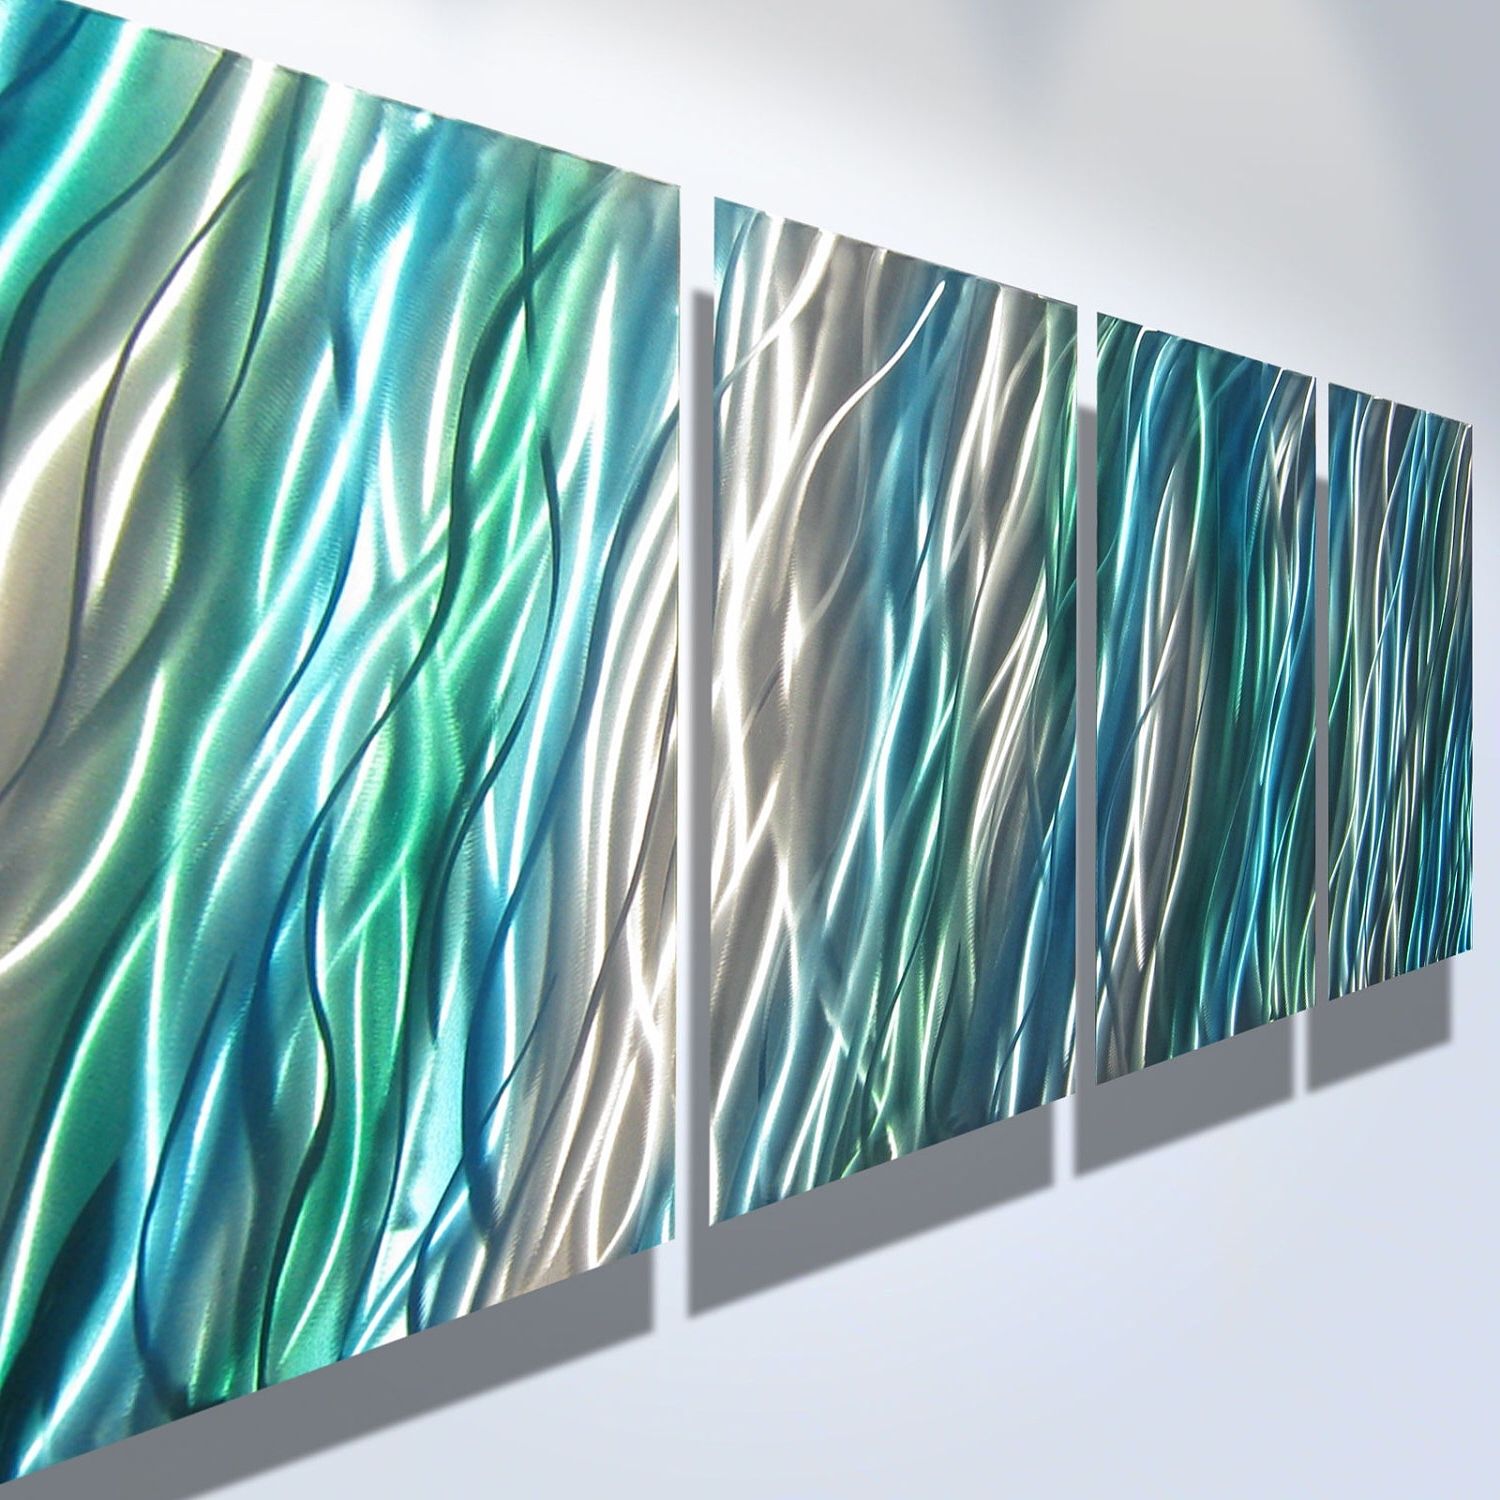 Preferred Abstract Outdoor Metal Wall Art Inside Metal Wall Art Decor Abstract Contemporary Modern Sculpture (View 12 of 15)